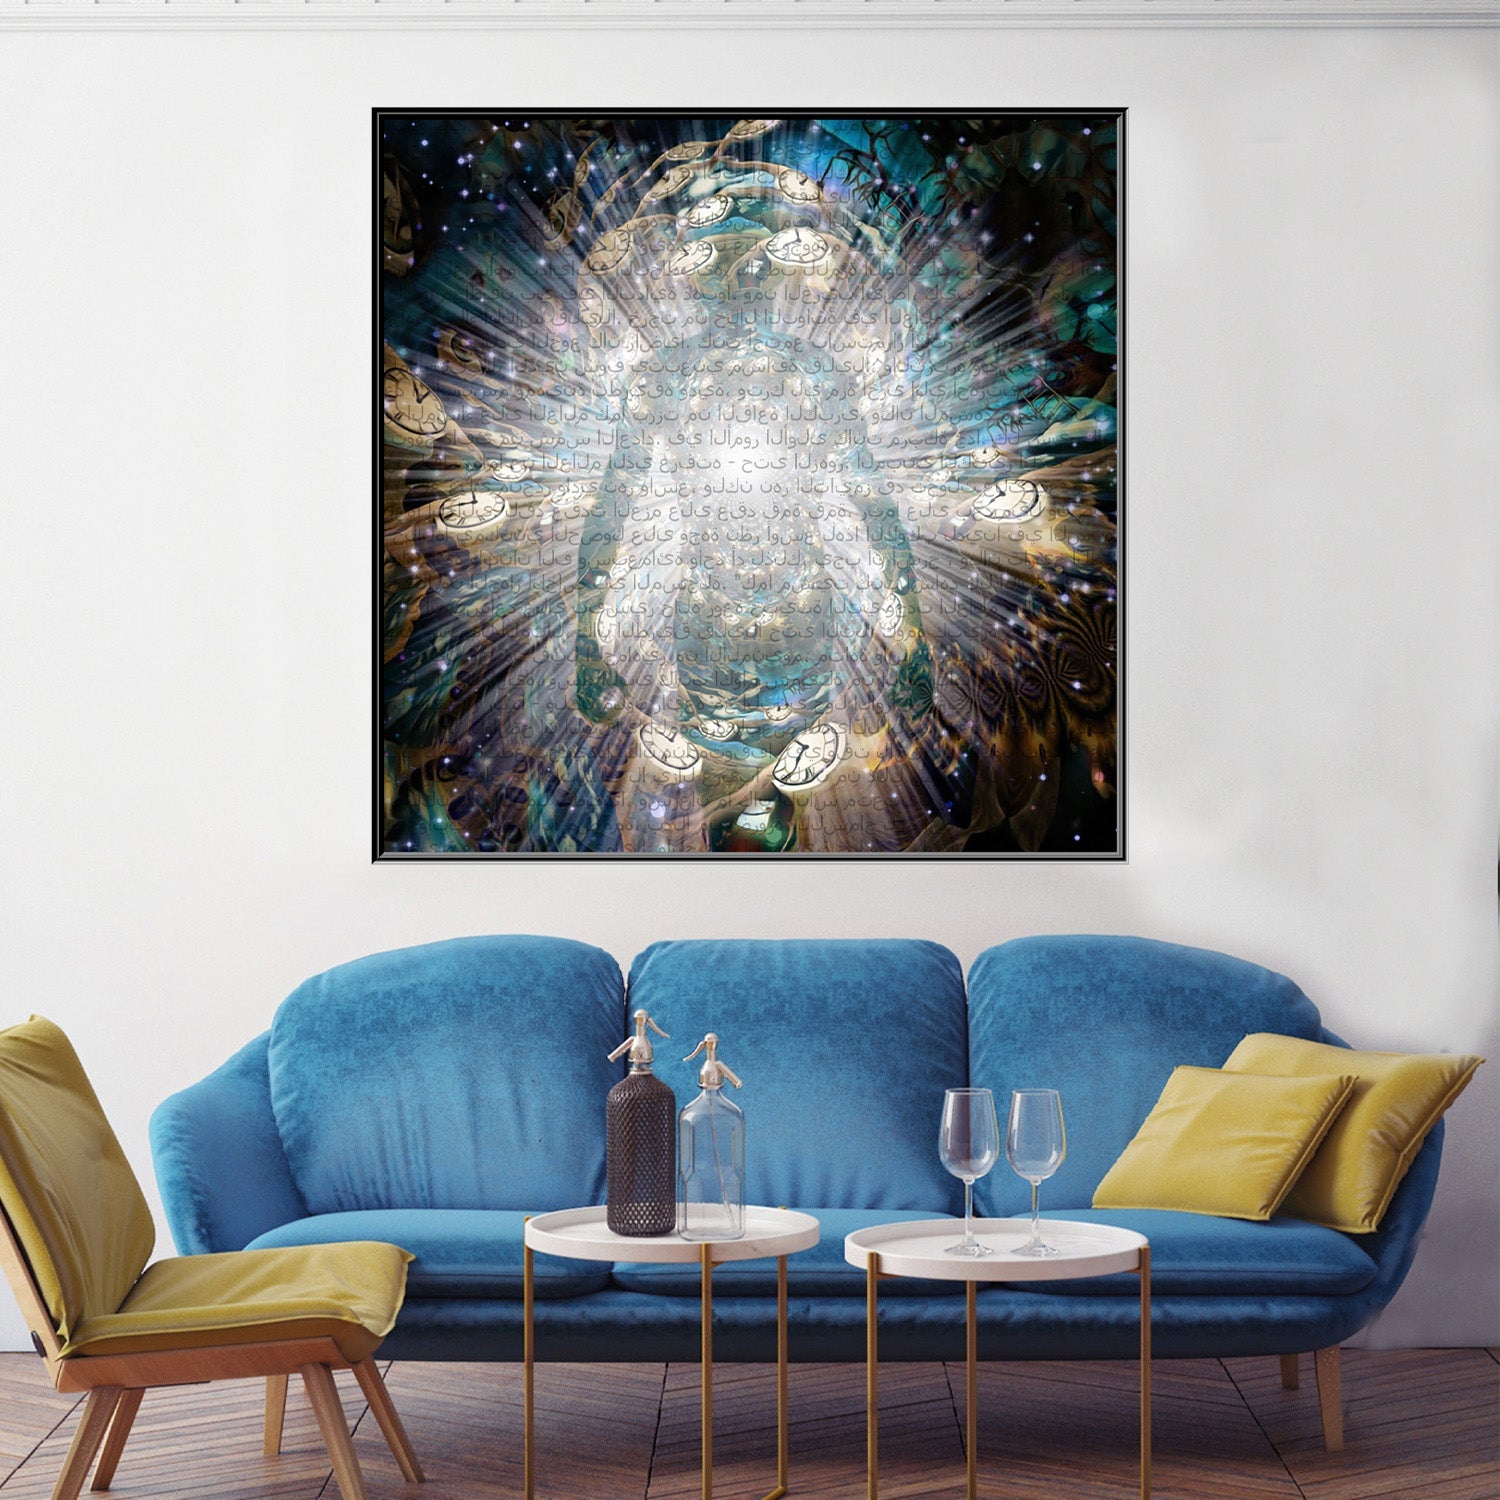 https://cdn.shopify.com/s/files/1/0387/9986/8044/products/TheSoulCanvasArtprintStretched-1.jpg